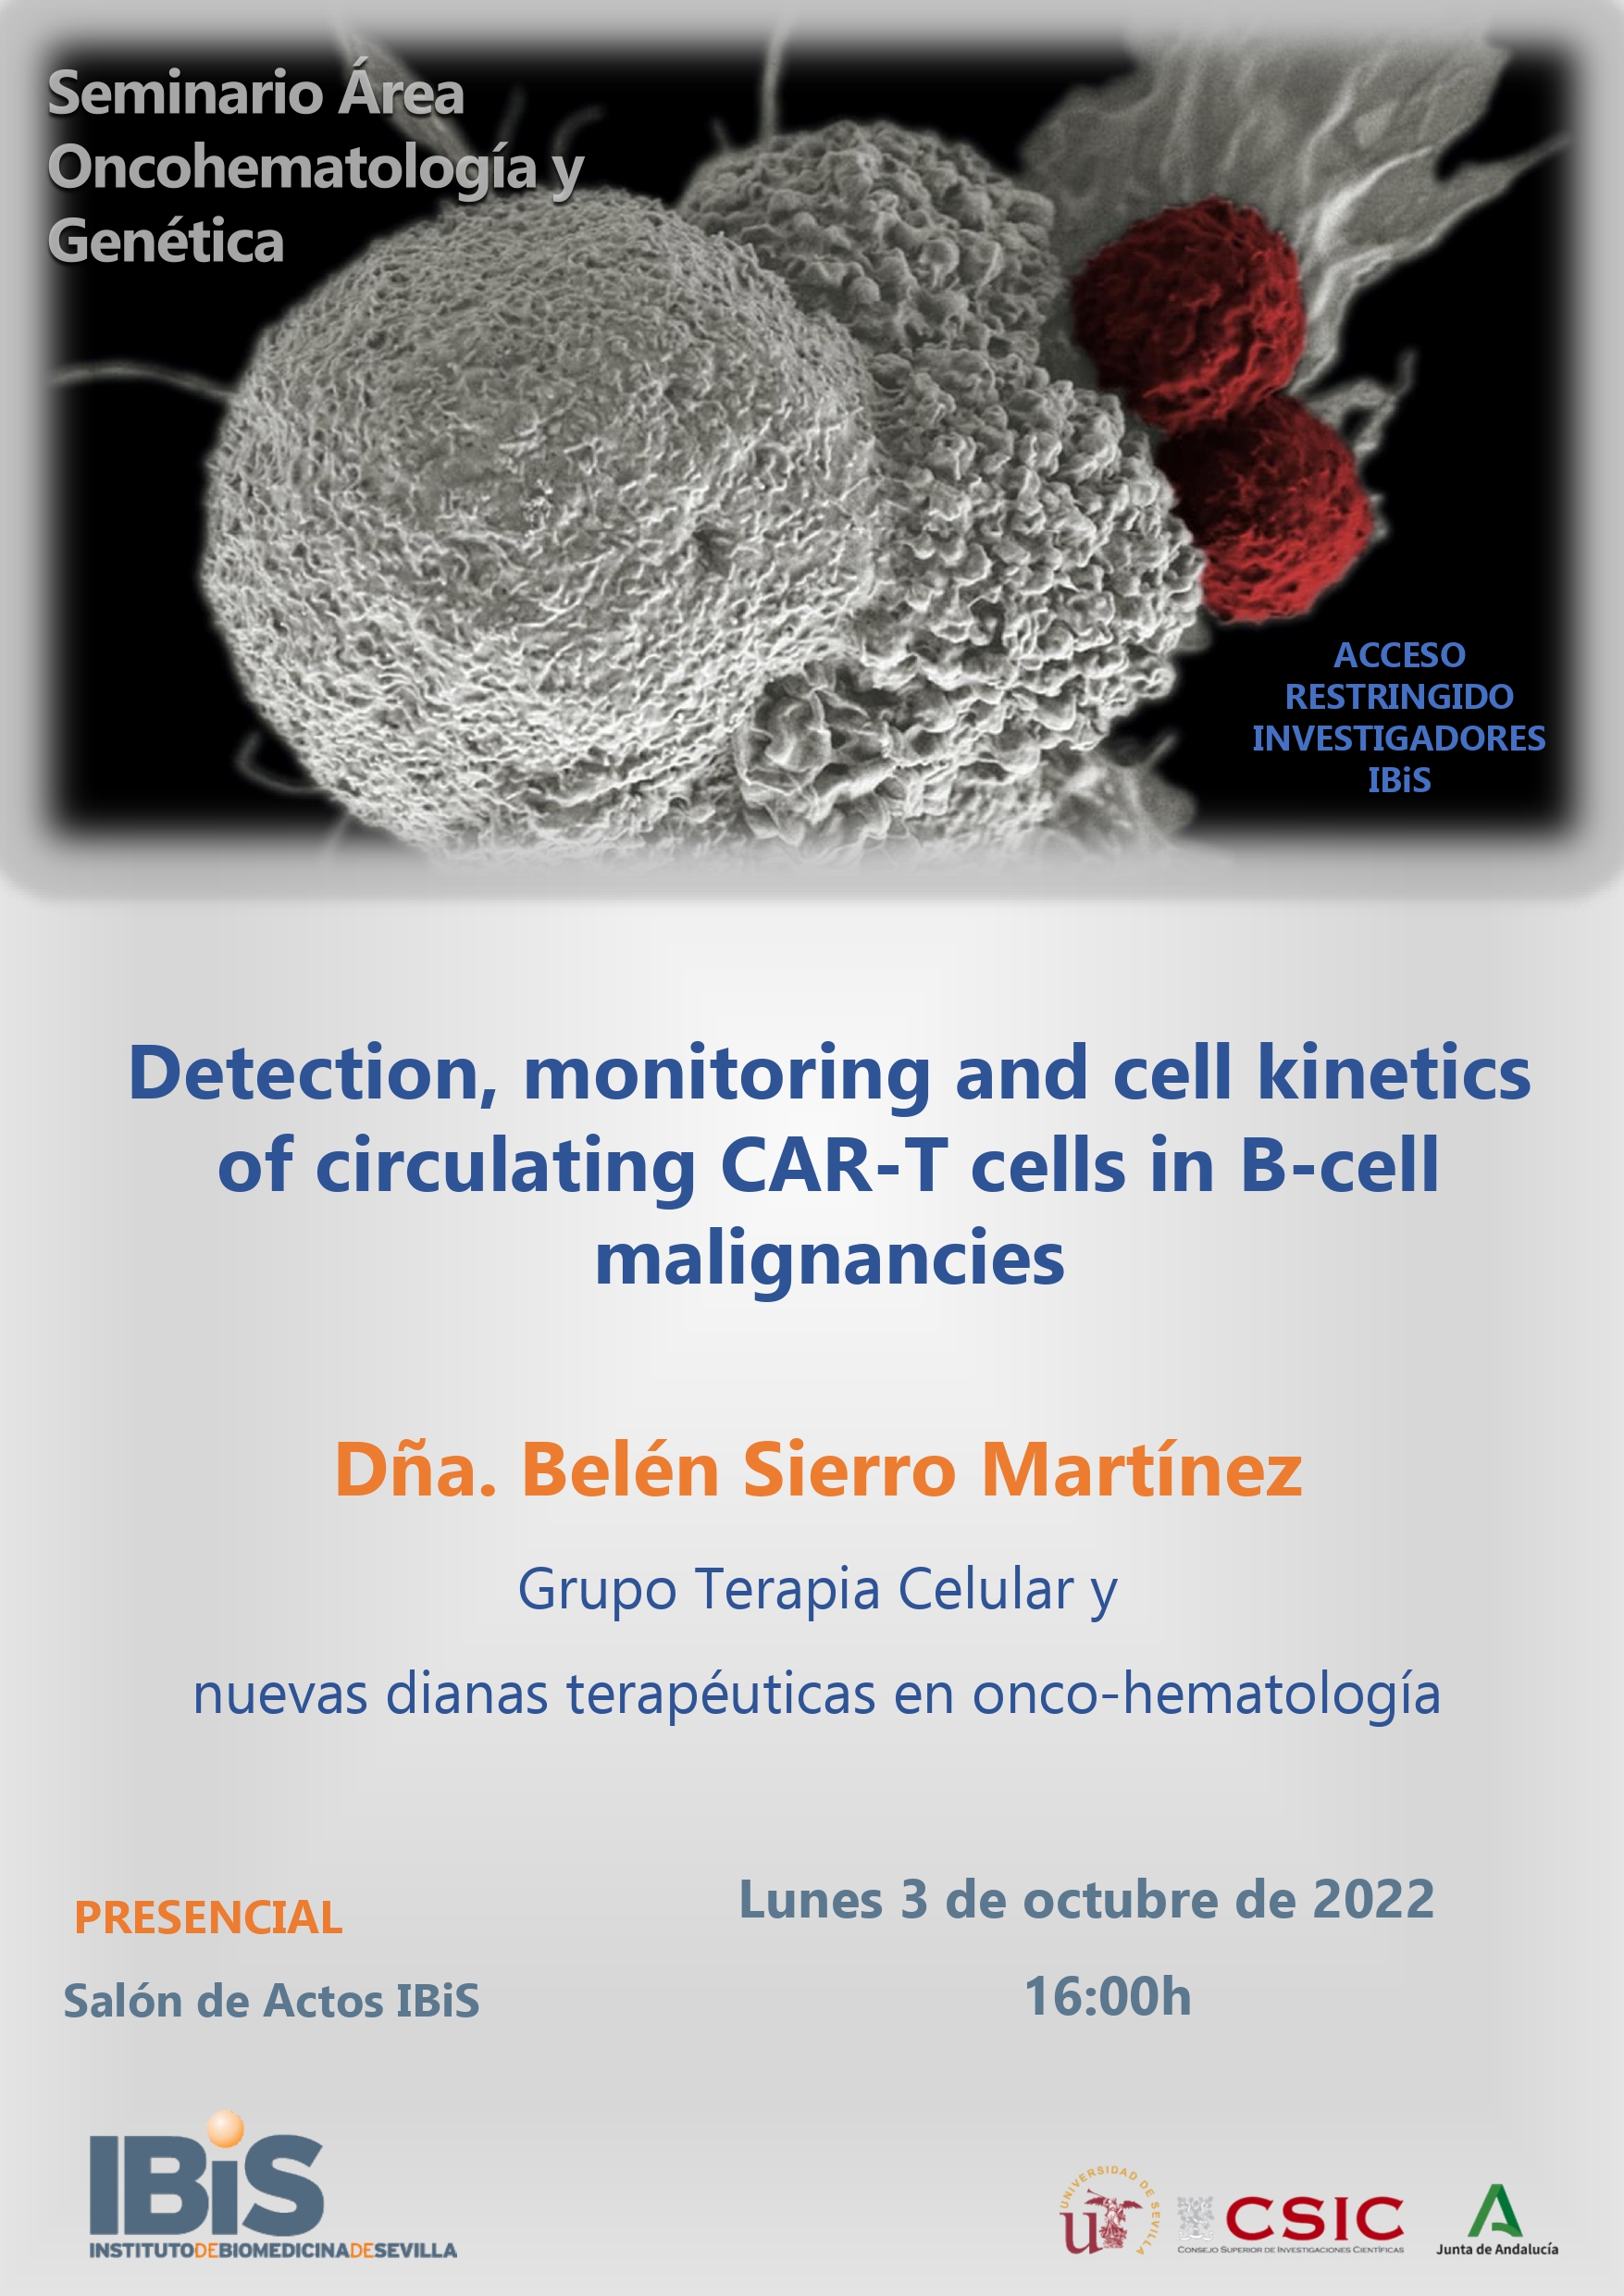 Poster: Detection, monitoring and cell kinetics of circulating CAR T cells in B cell malignancies